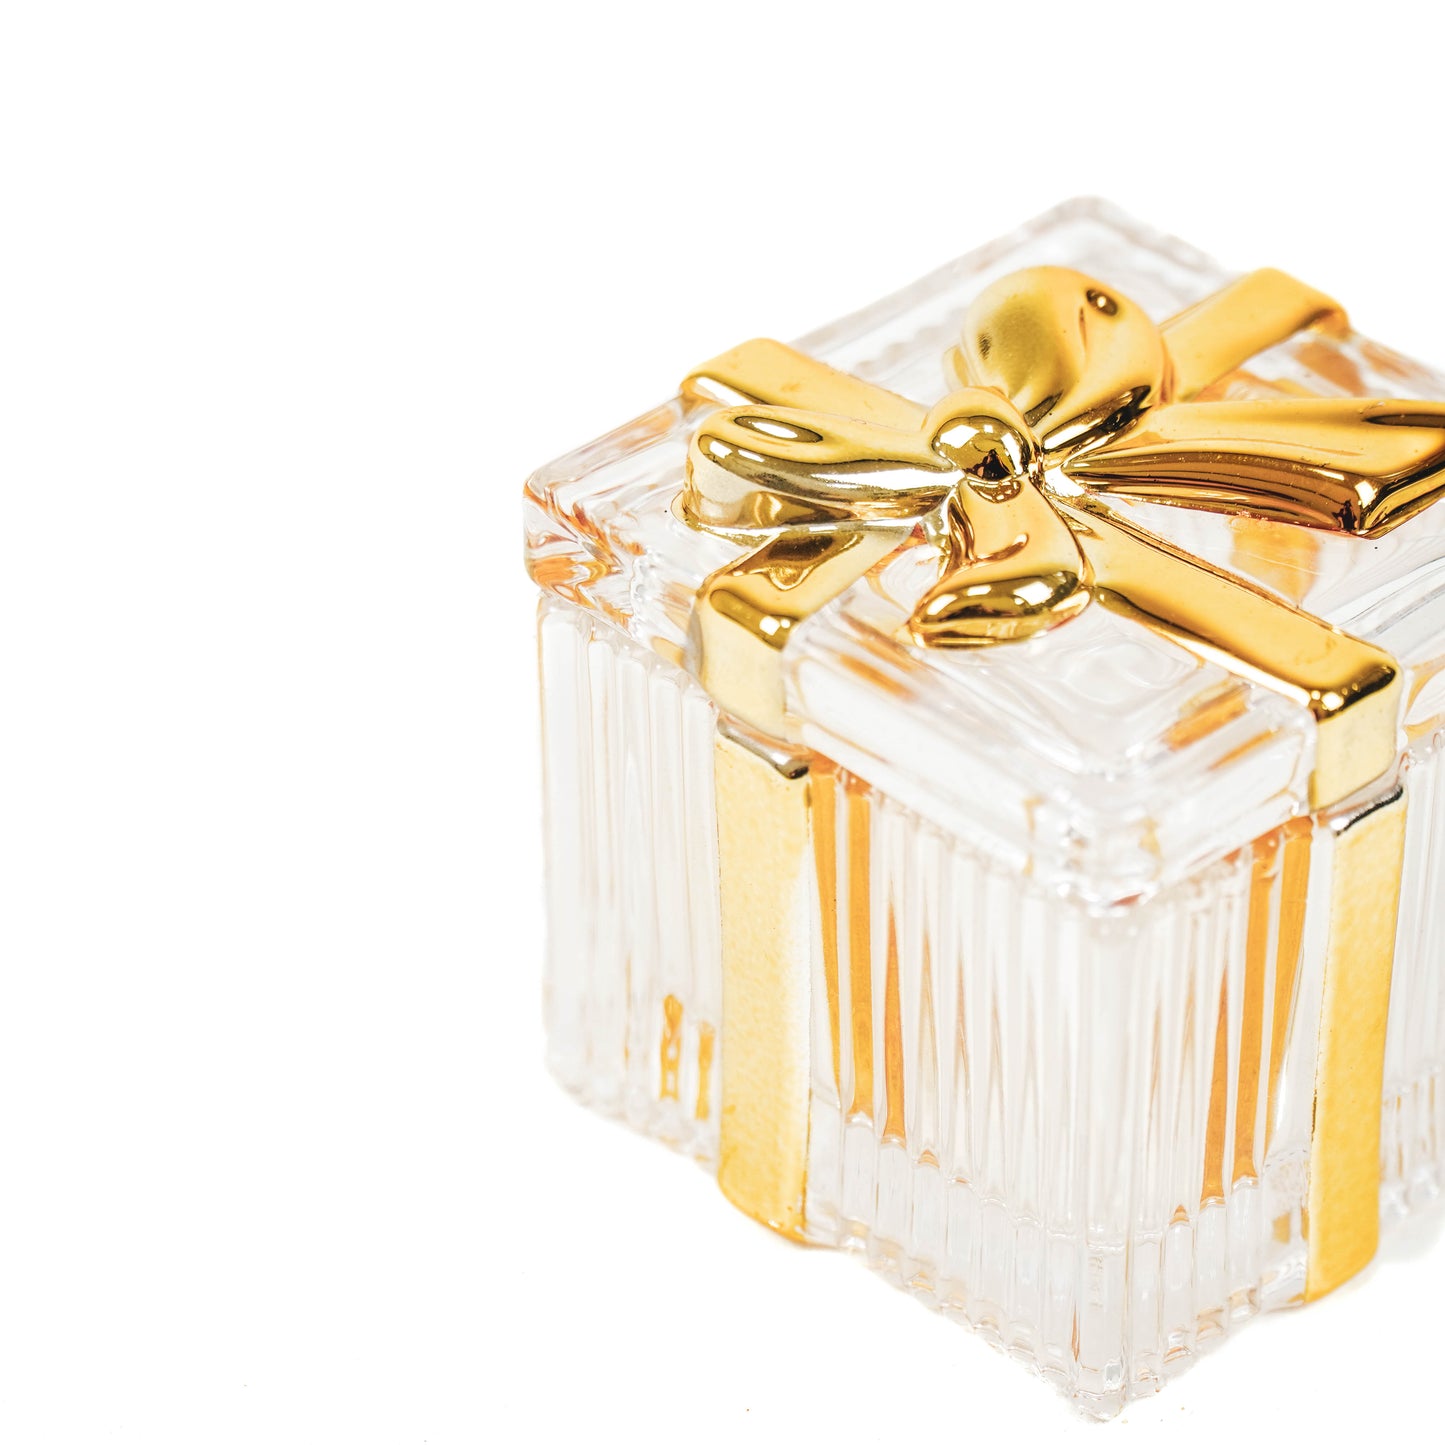 HV Box of glass with golden ribbon - 7.3x6.3cm